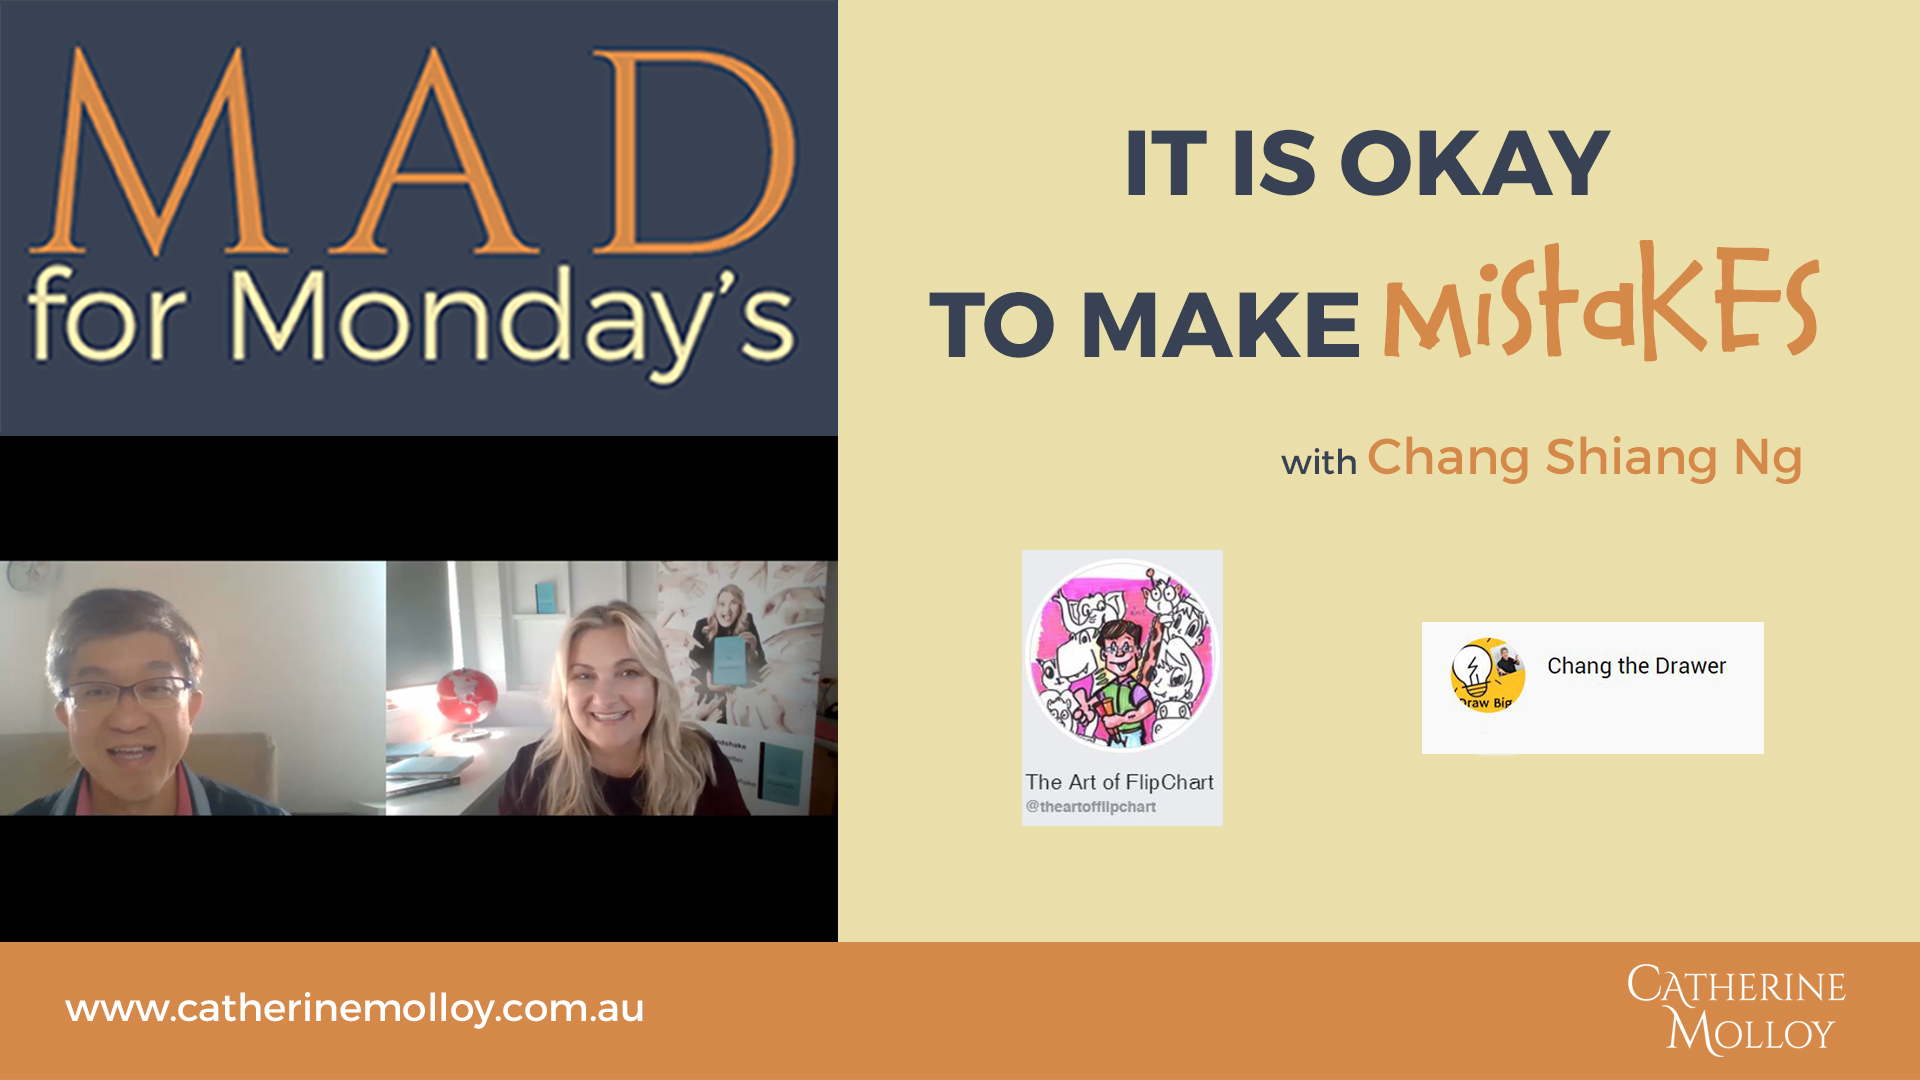 MAD for Monday’s – It is Okay to Make Mistakes